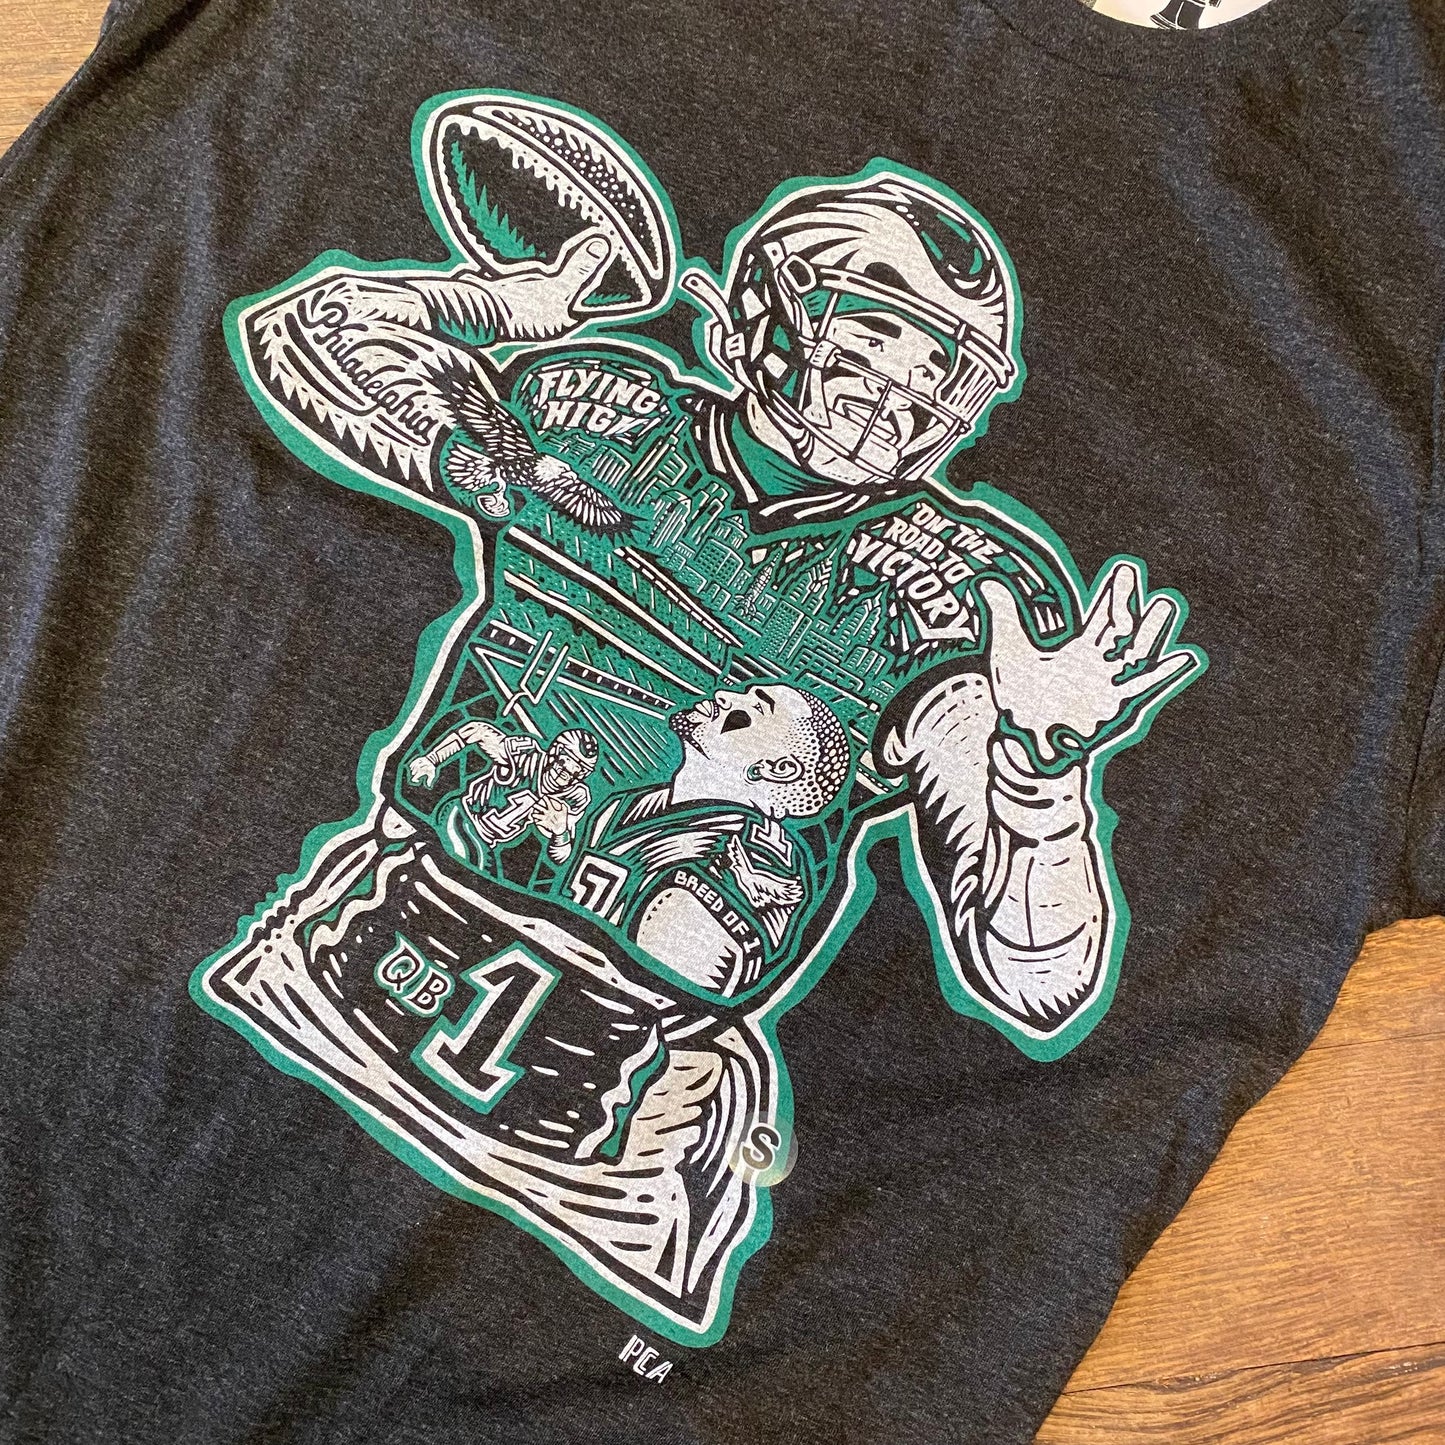 A black Jalen Hurts T-shirt featuring a graphic of Jalen Hurts in action, with stylized text and green accents by Paul Carpenter.